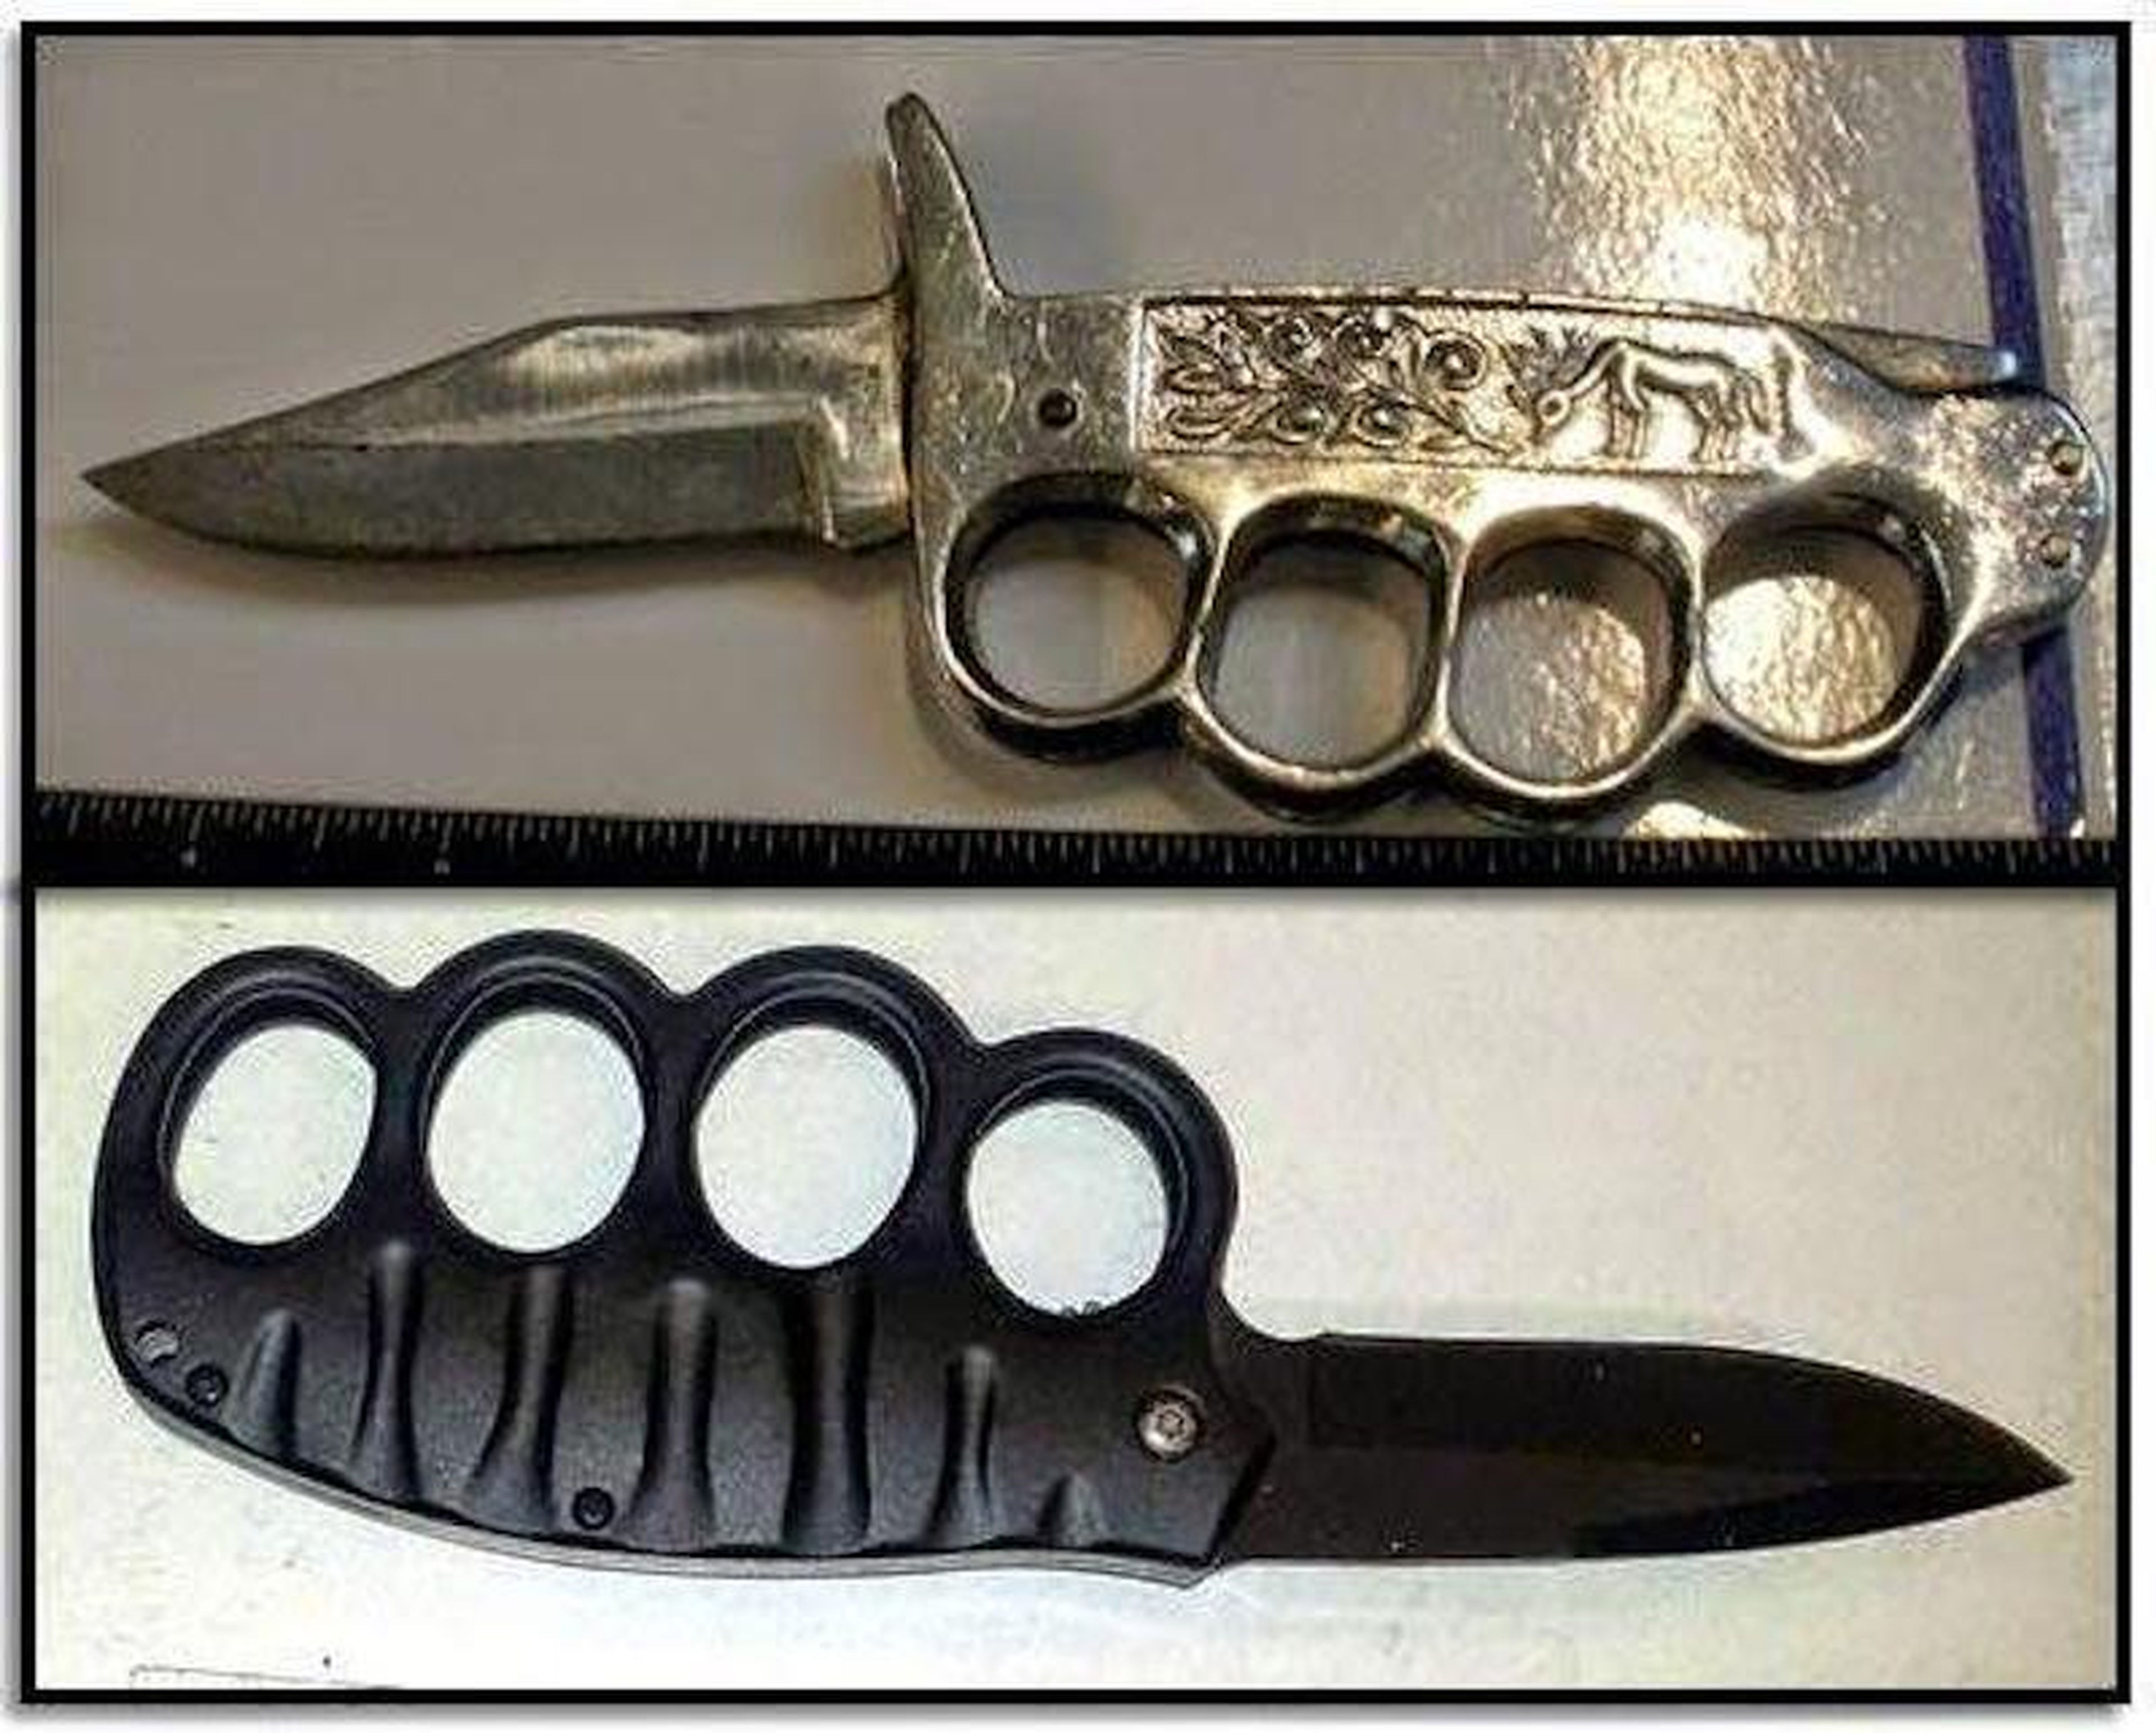 3. Knuckle knives